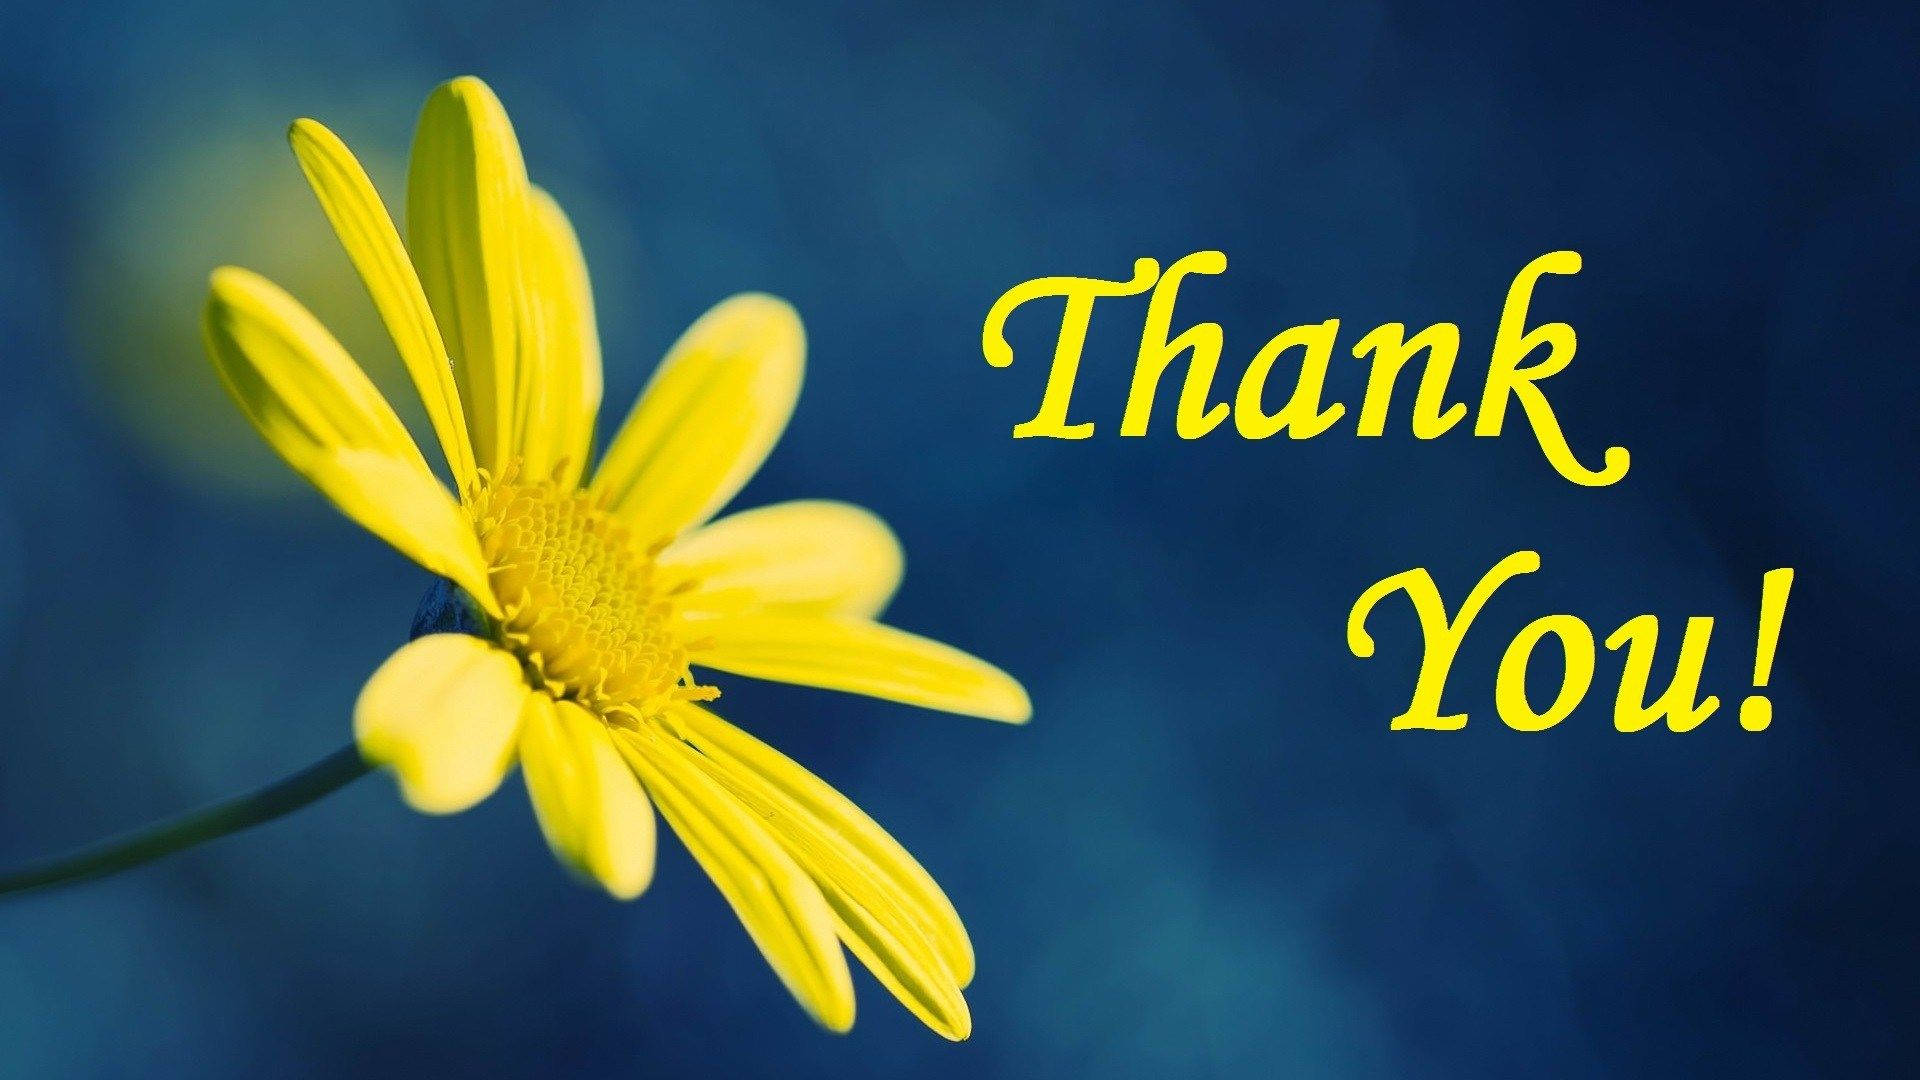 Saying Thanks For Watching With Yellow Daisy Wallpaper